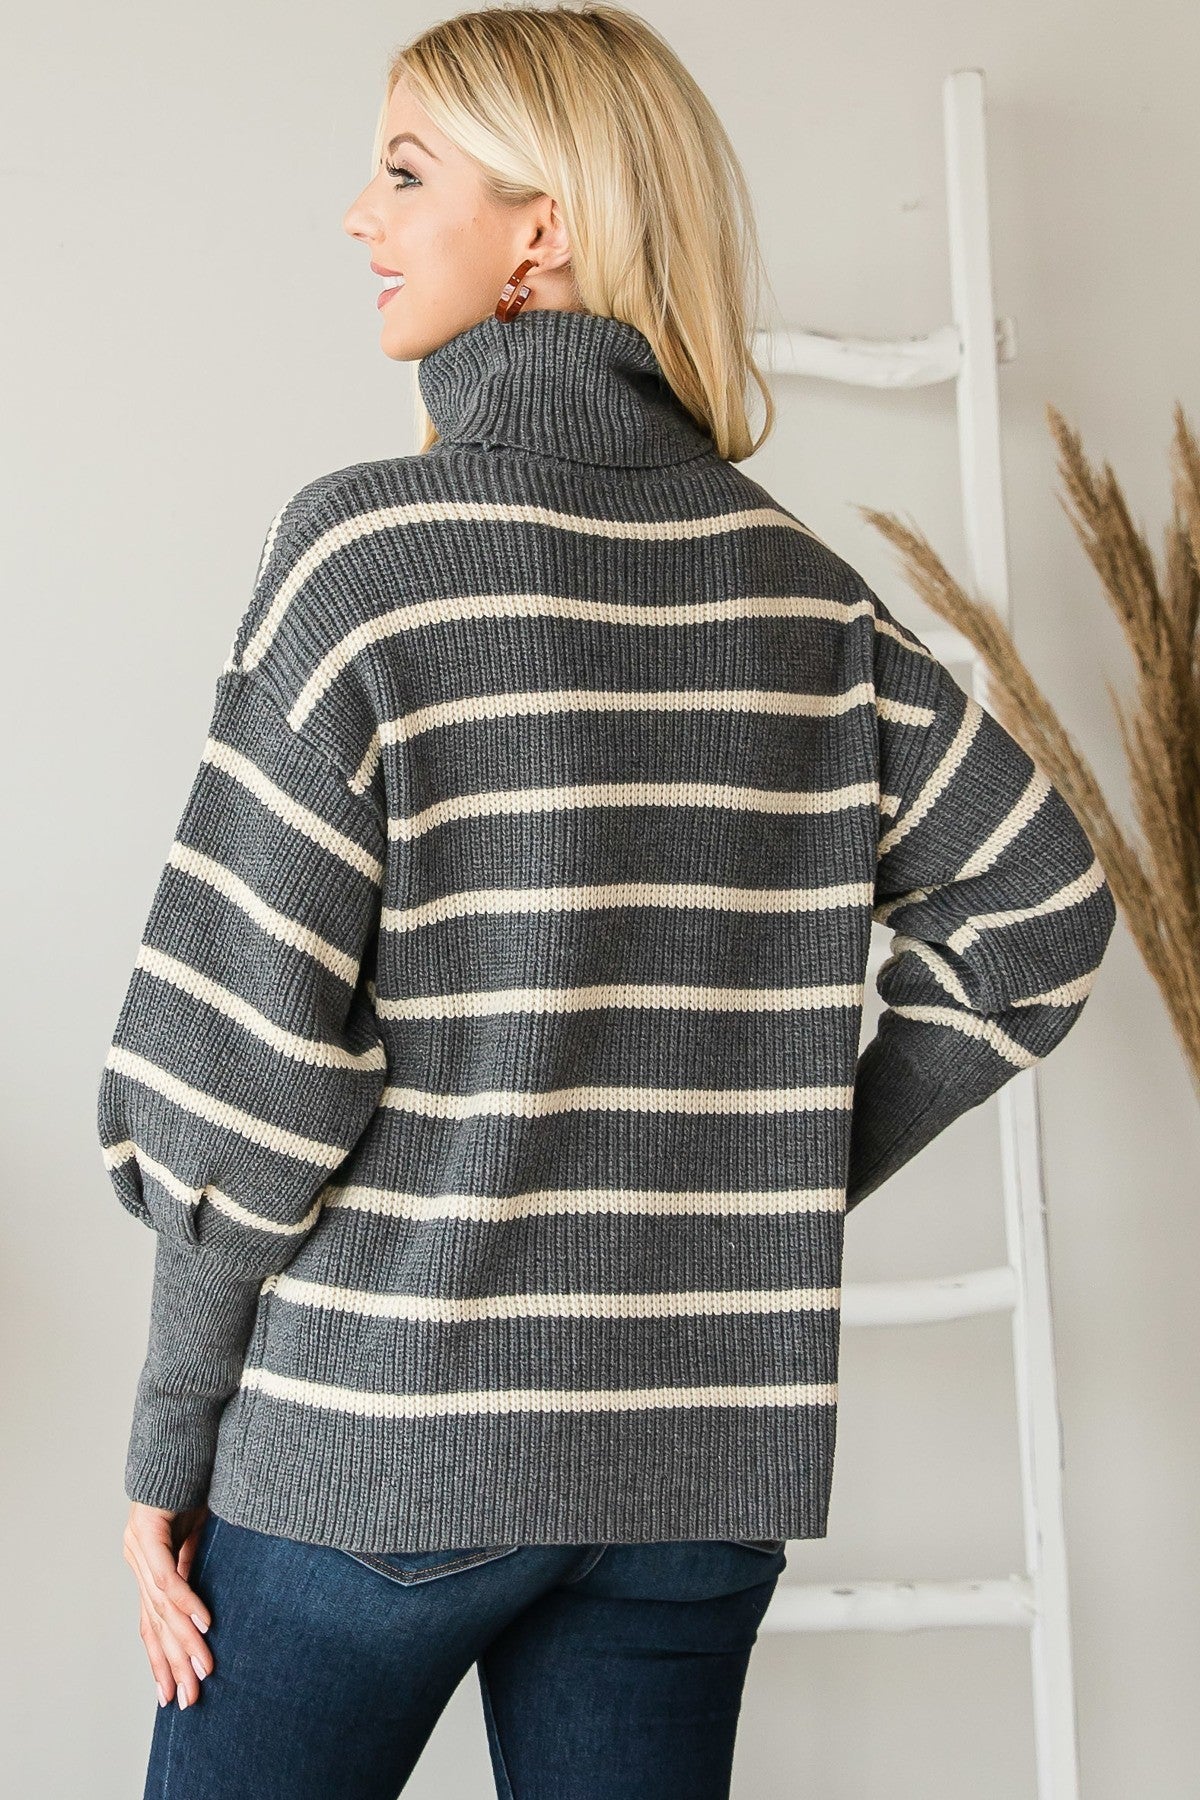 THE HEATHER Heavy Knit Striped Turtle Neck Knit Sweater